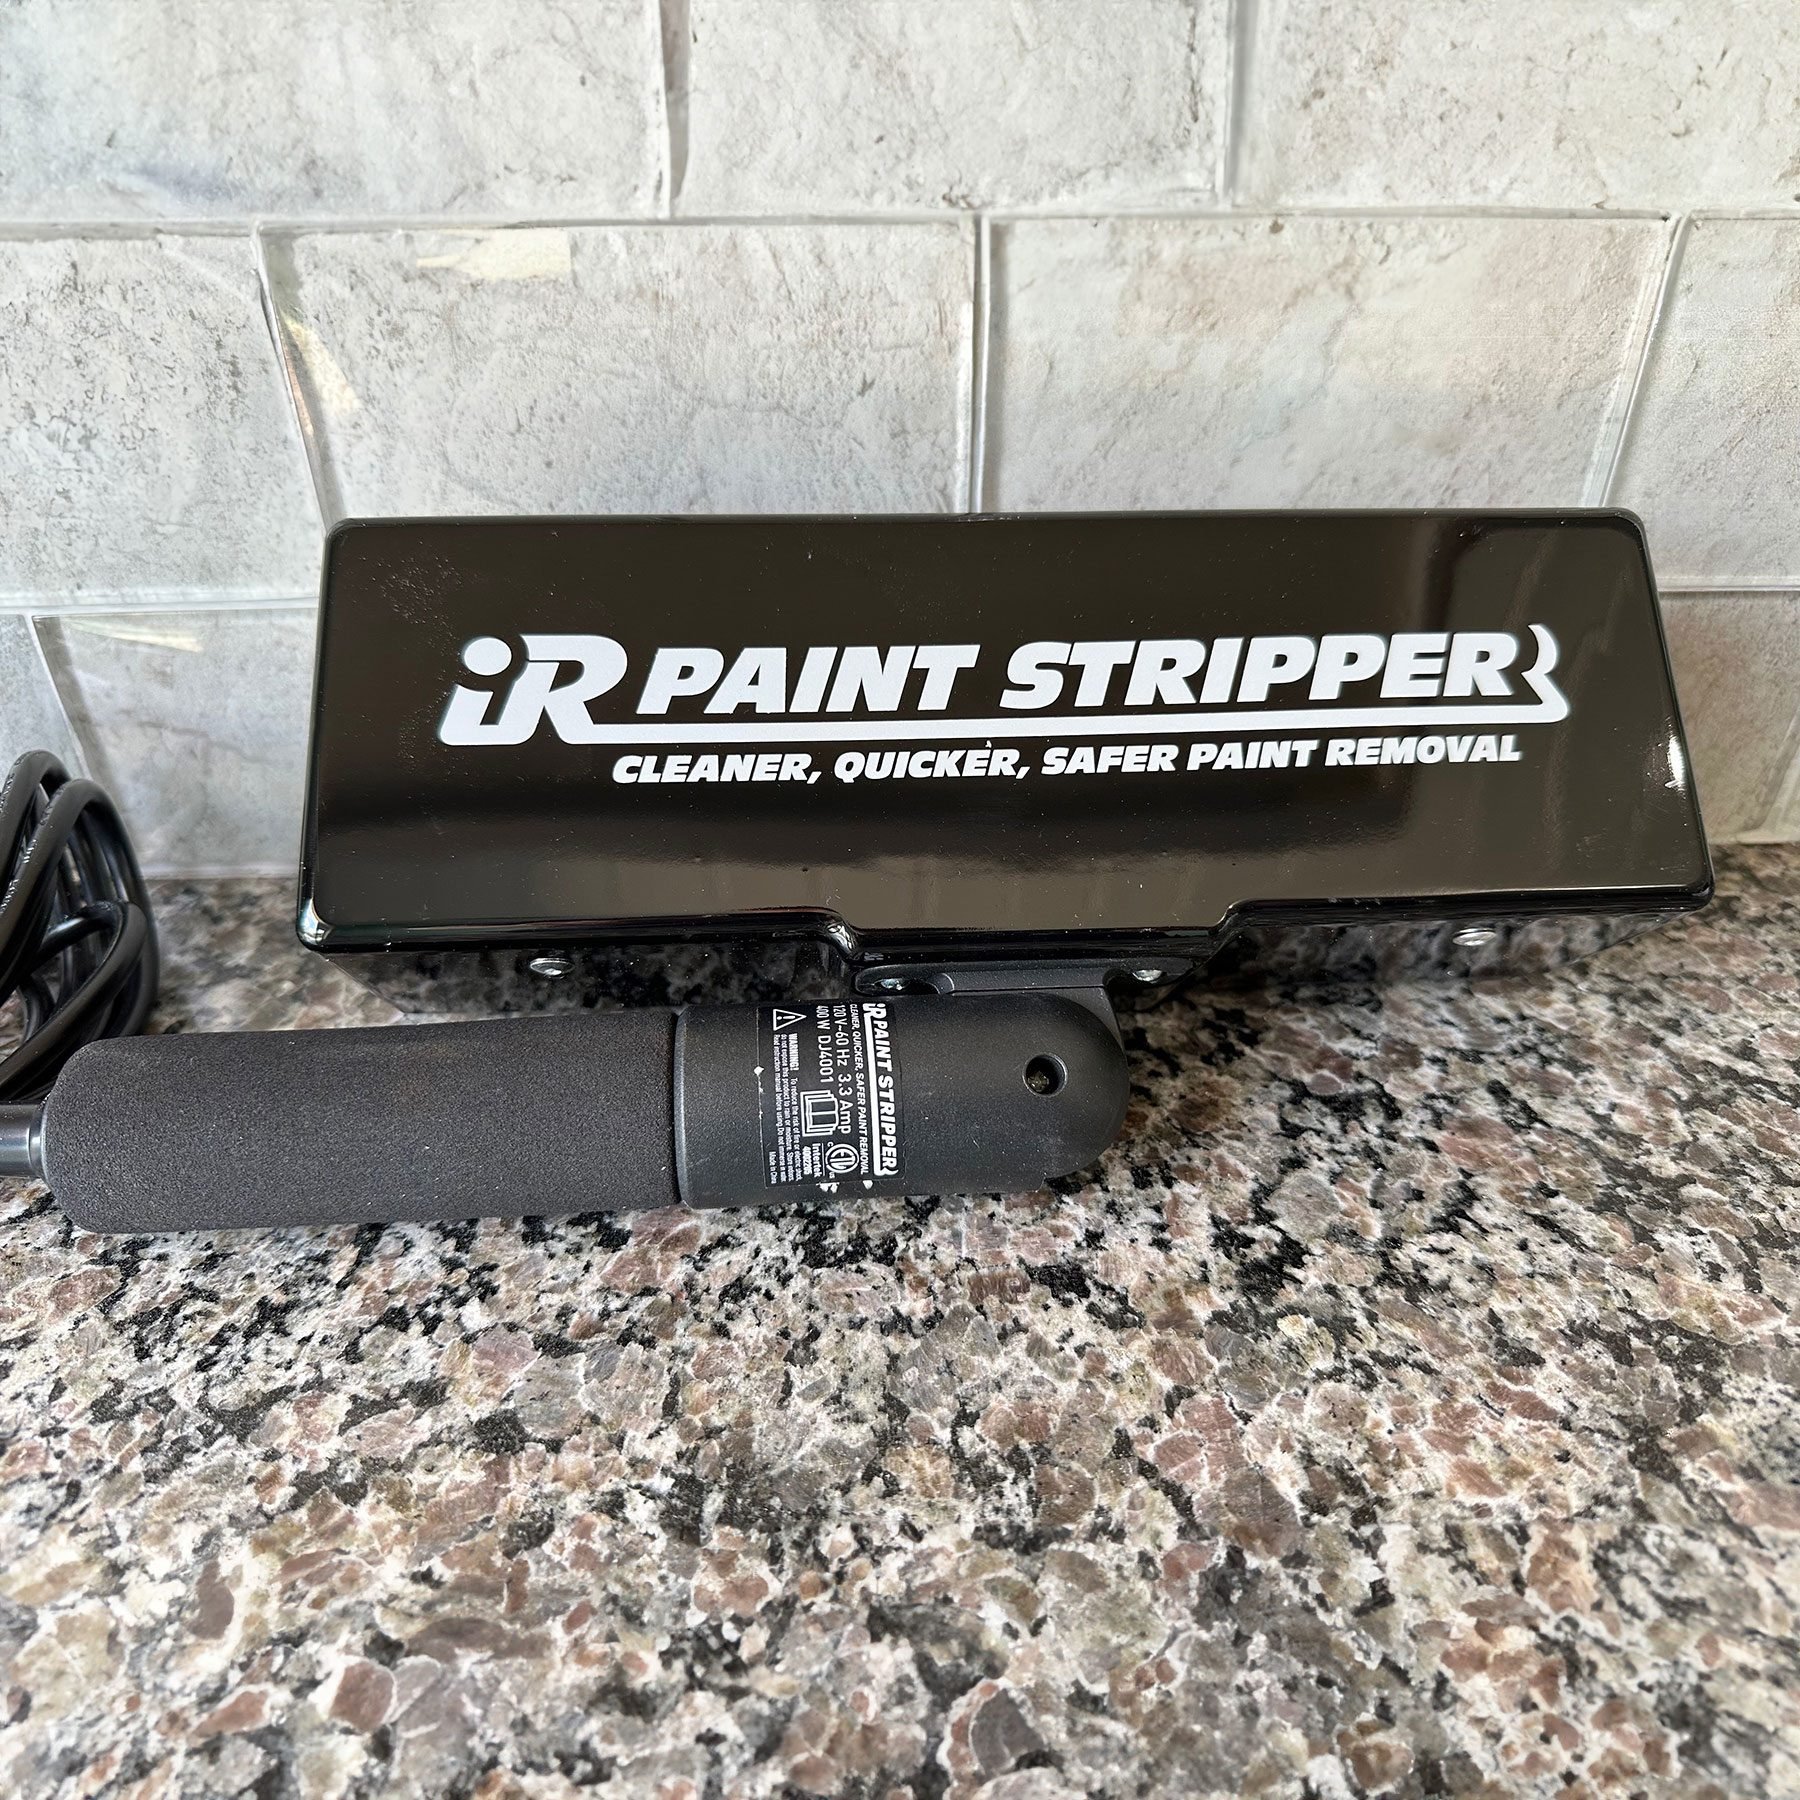 I Tried the Spengar IR Paint Stripper and Love Removing Paint Without the Chemicals